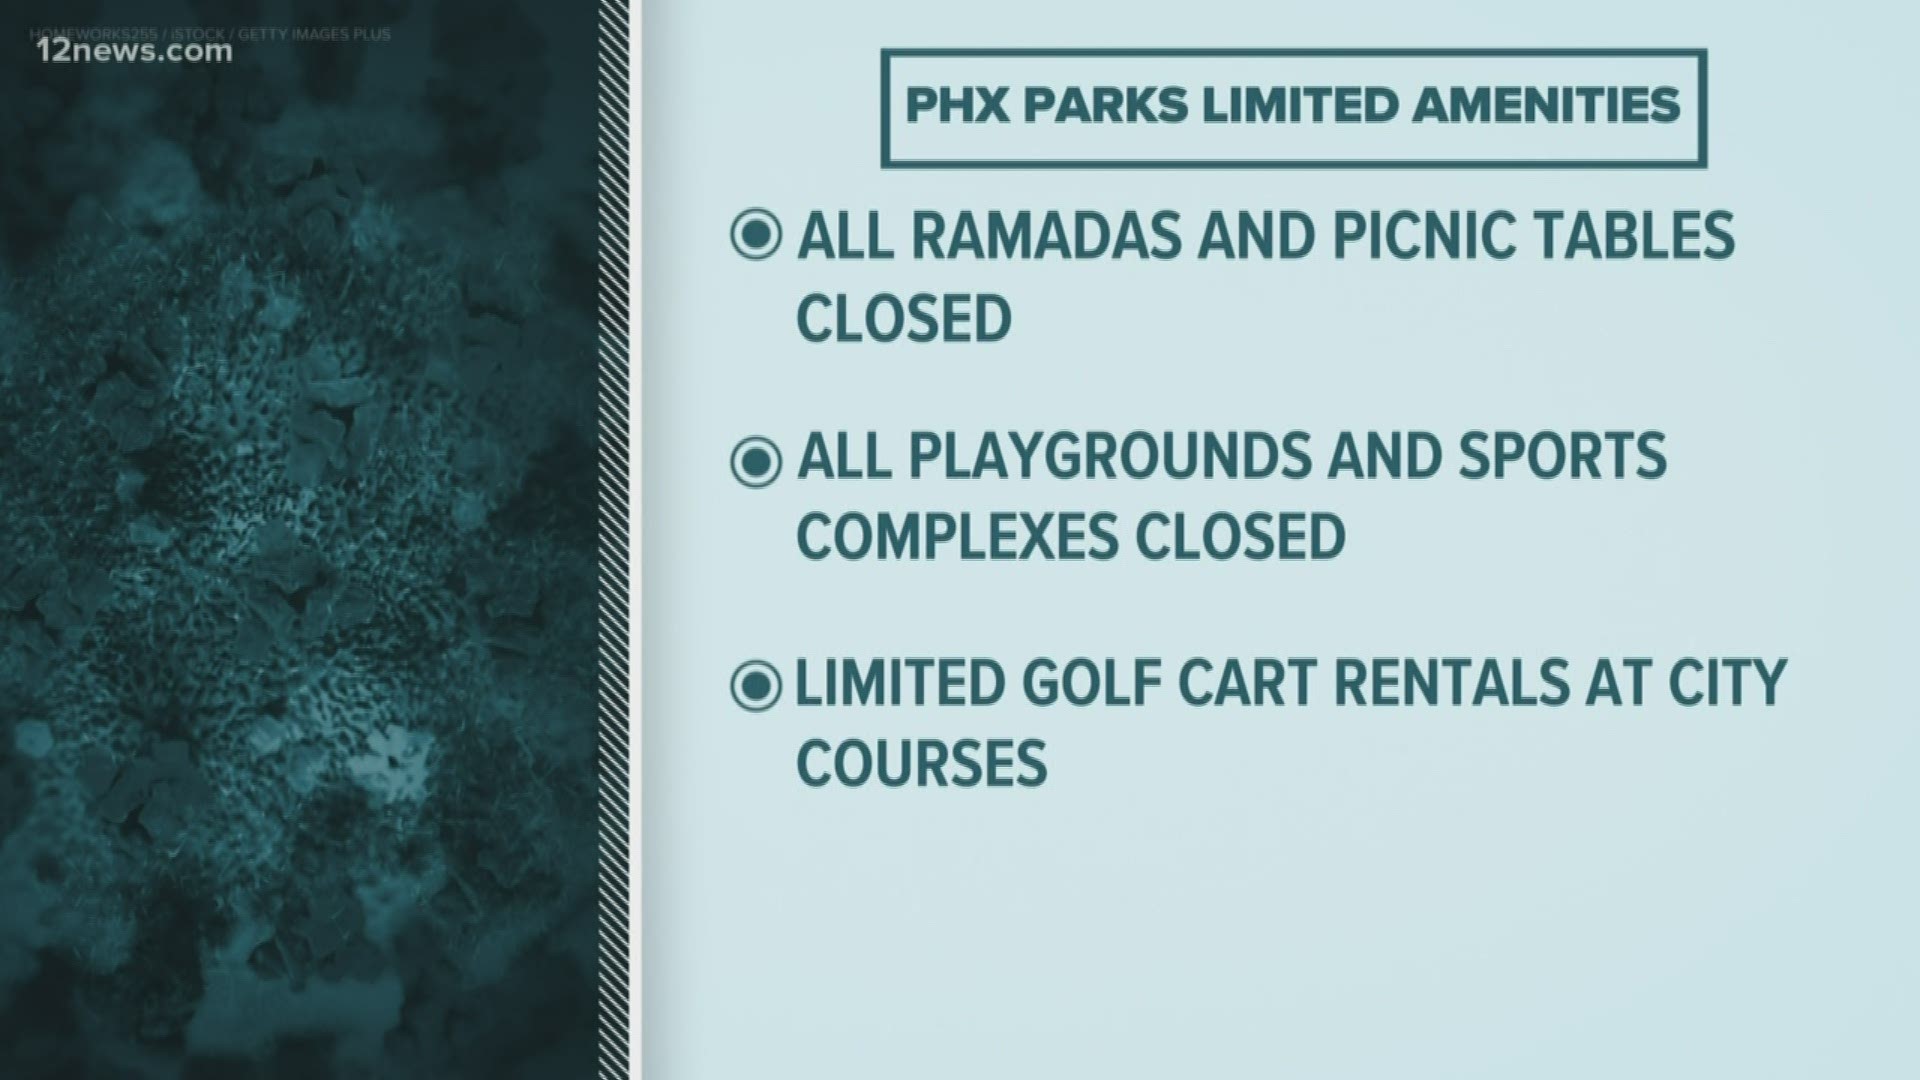 Phoenix Parks and Recreation is closing all ramadas, picnic tables, playgrounds and sports complexes. Golf cart rentals are limited too.